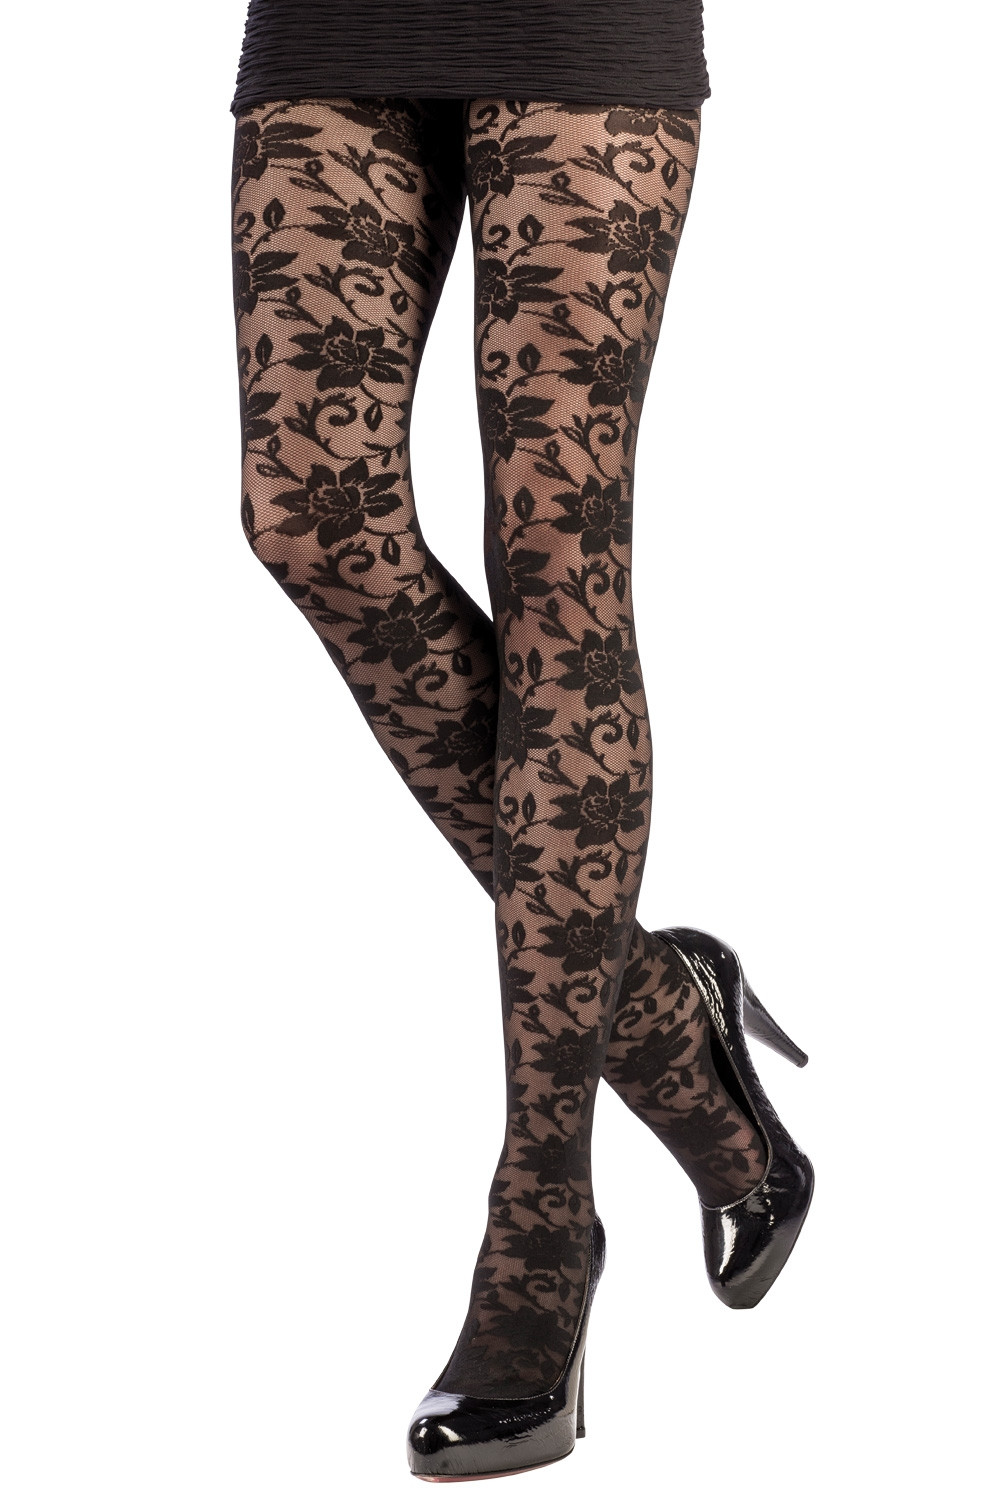 Floreal Lace Tights, Tights & Hosiery, Women